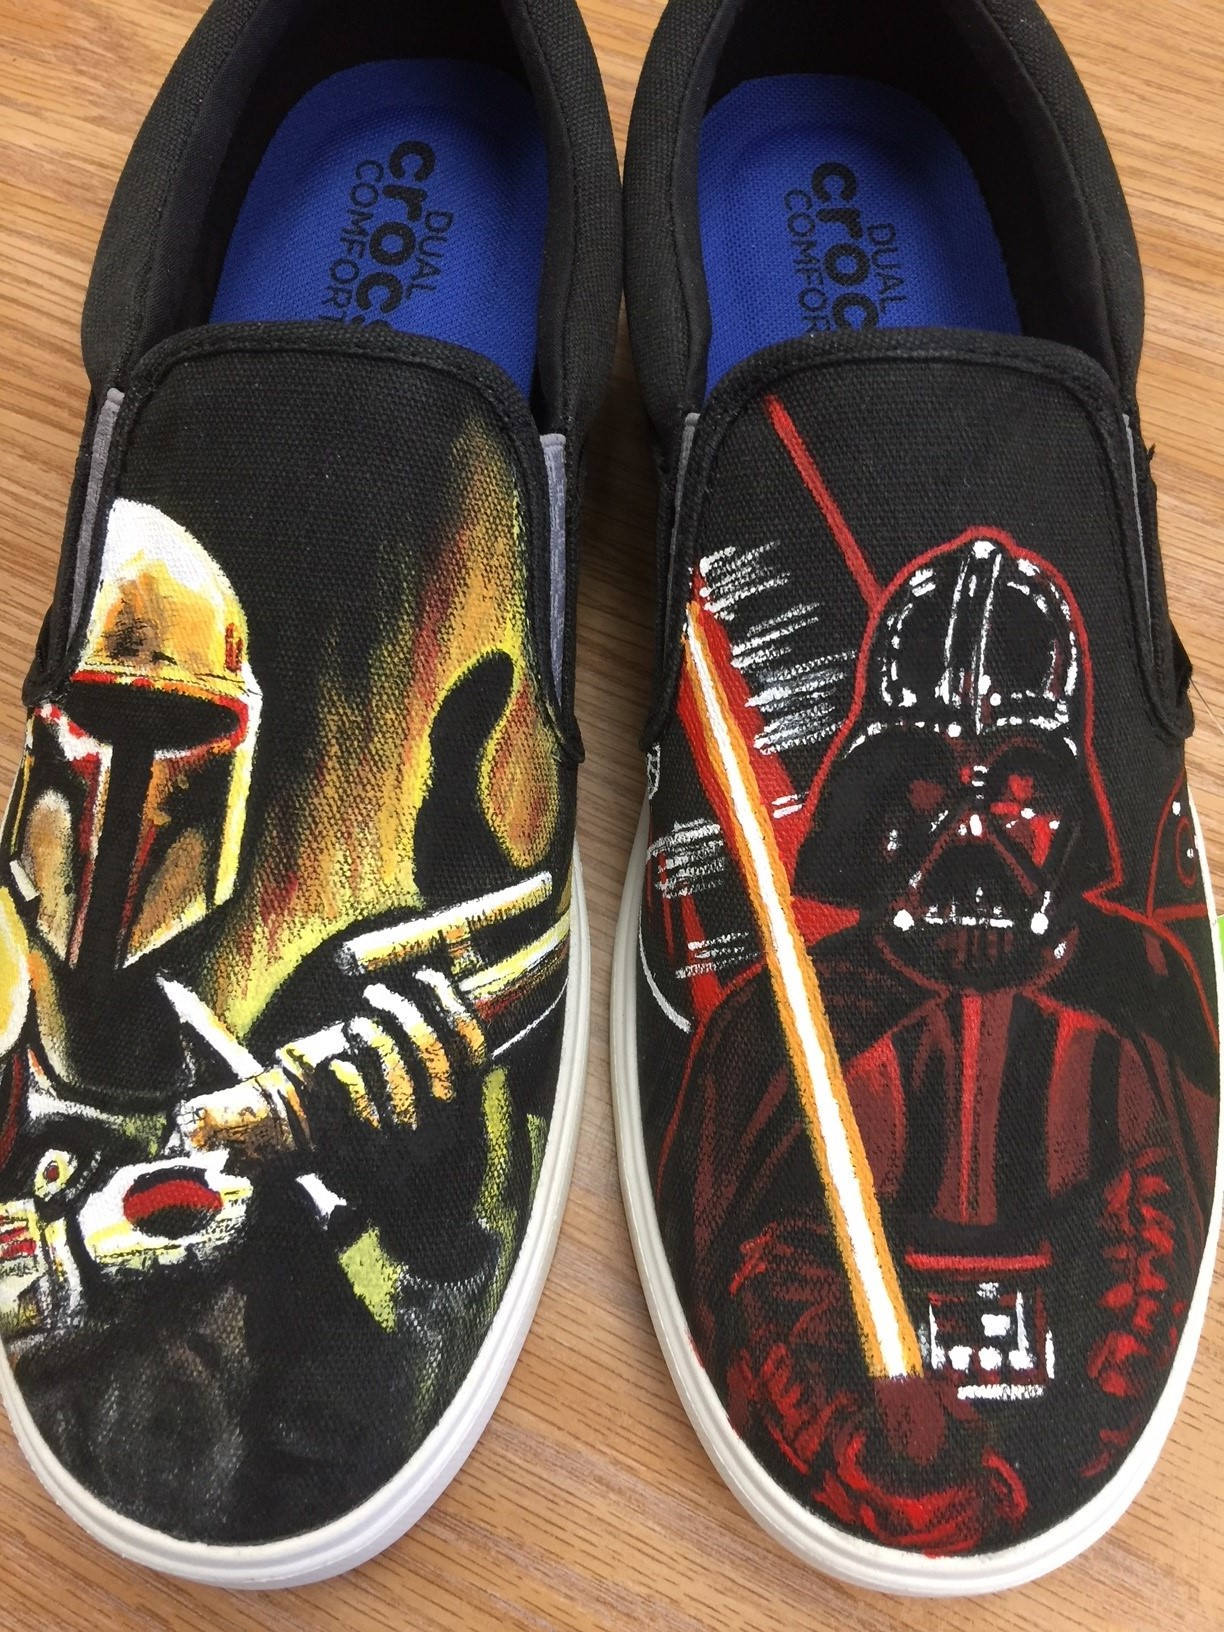 Painted Star Wars Shoes. Etsy